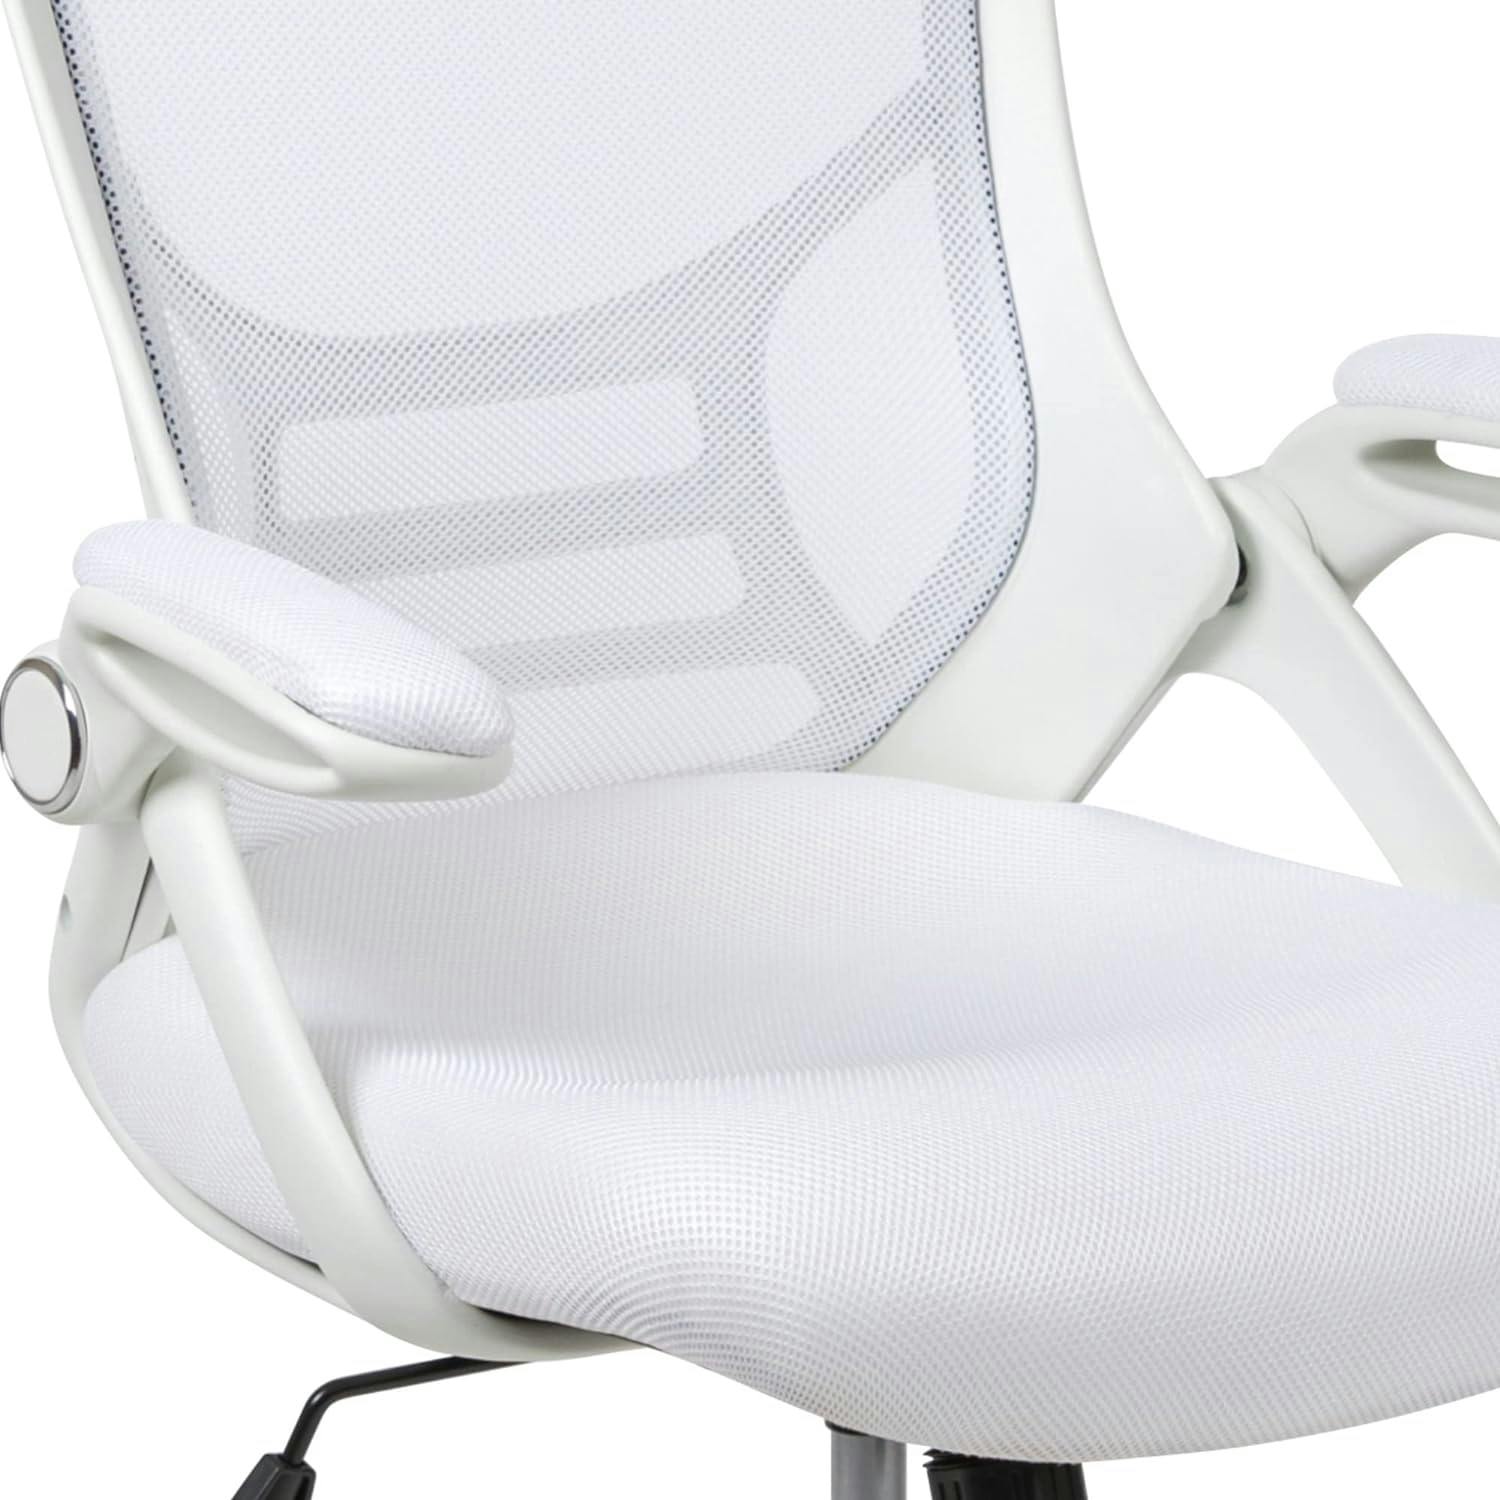 White High-Back Ergonomic Mesh Swivel Office Chair with Adjustable Arms